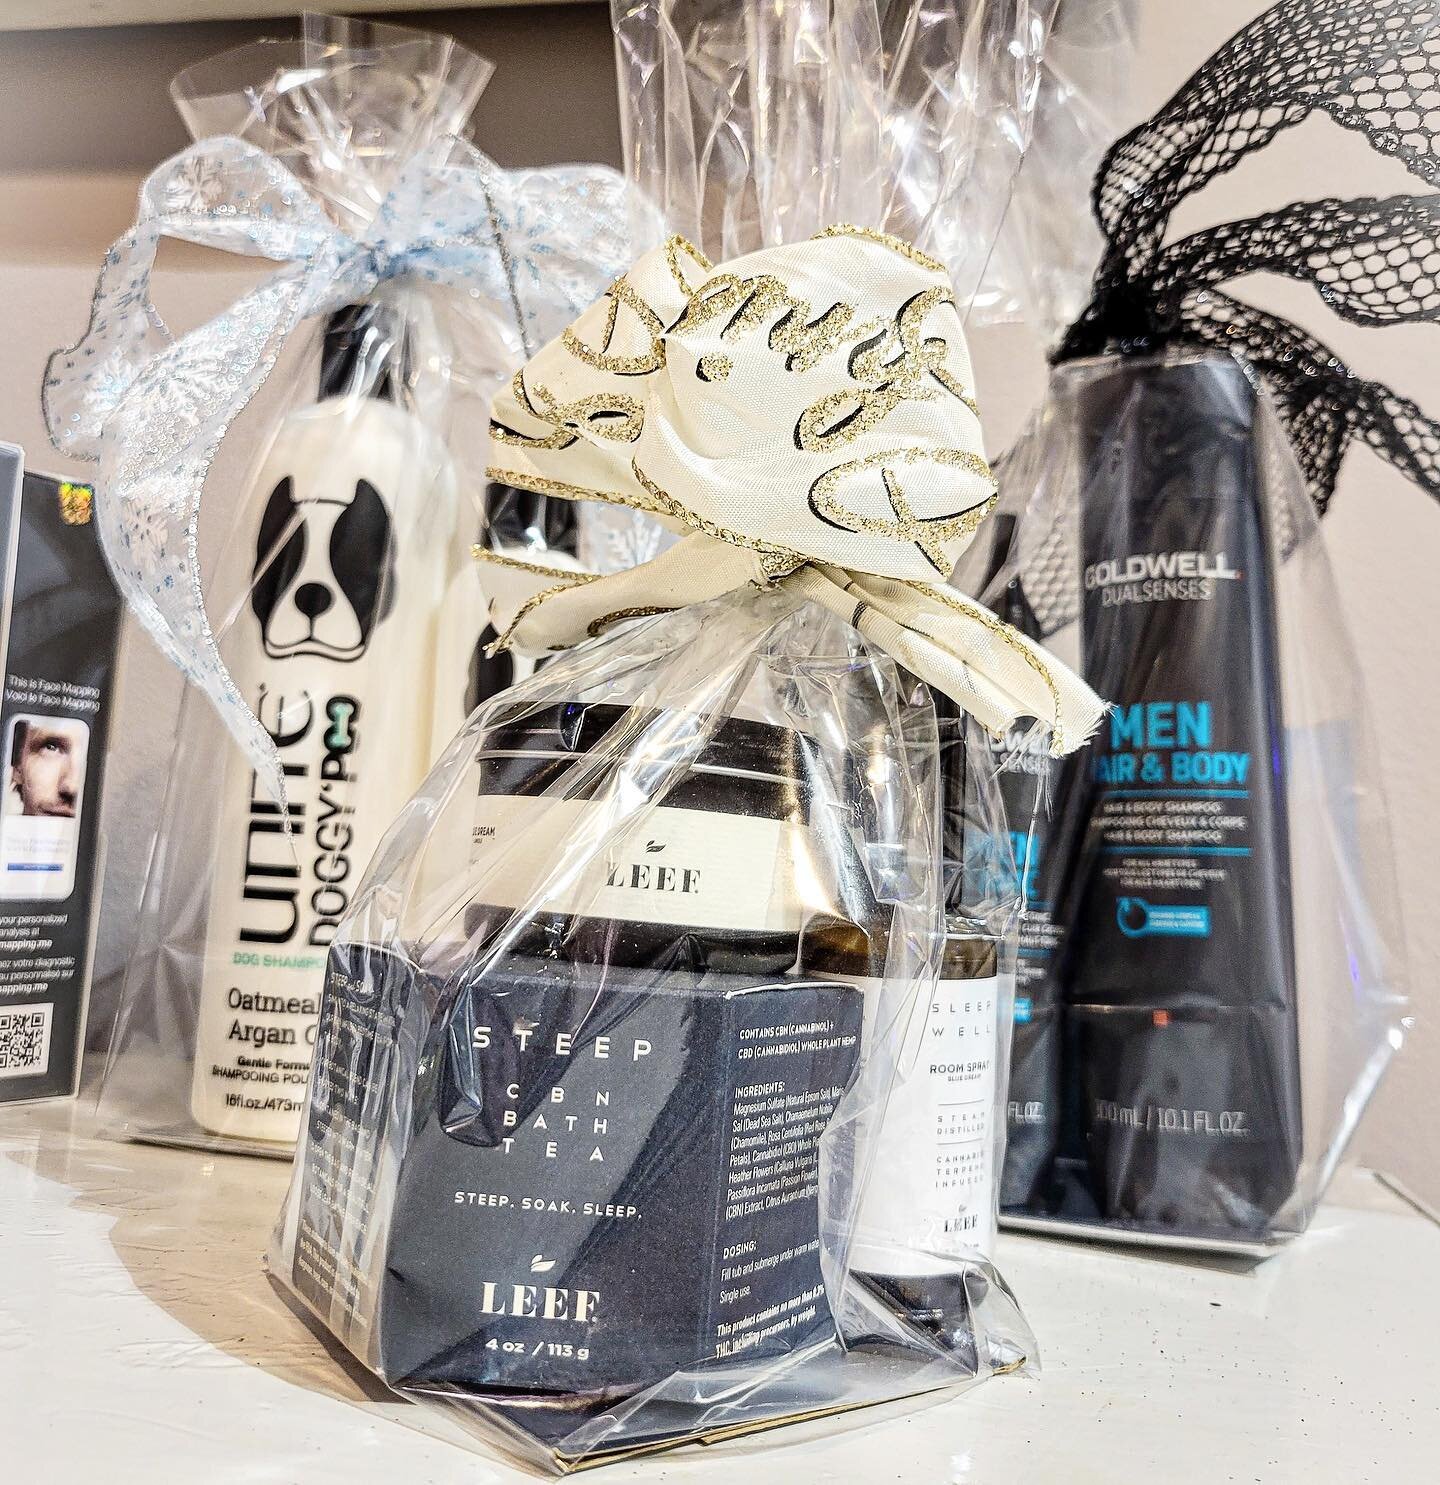 Gifts galore:

Have you checked out our holiday gift bundles yet? Starting at $35, these are the perfect present for everyone on your list- even your cousin&rsquo;s puppy!

@leef_organics Sleep Kit: $45
@unite_hair Doggy Bundle: $30
@goldwellus Men&r